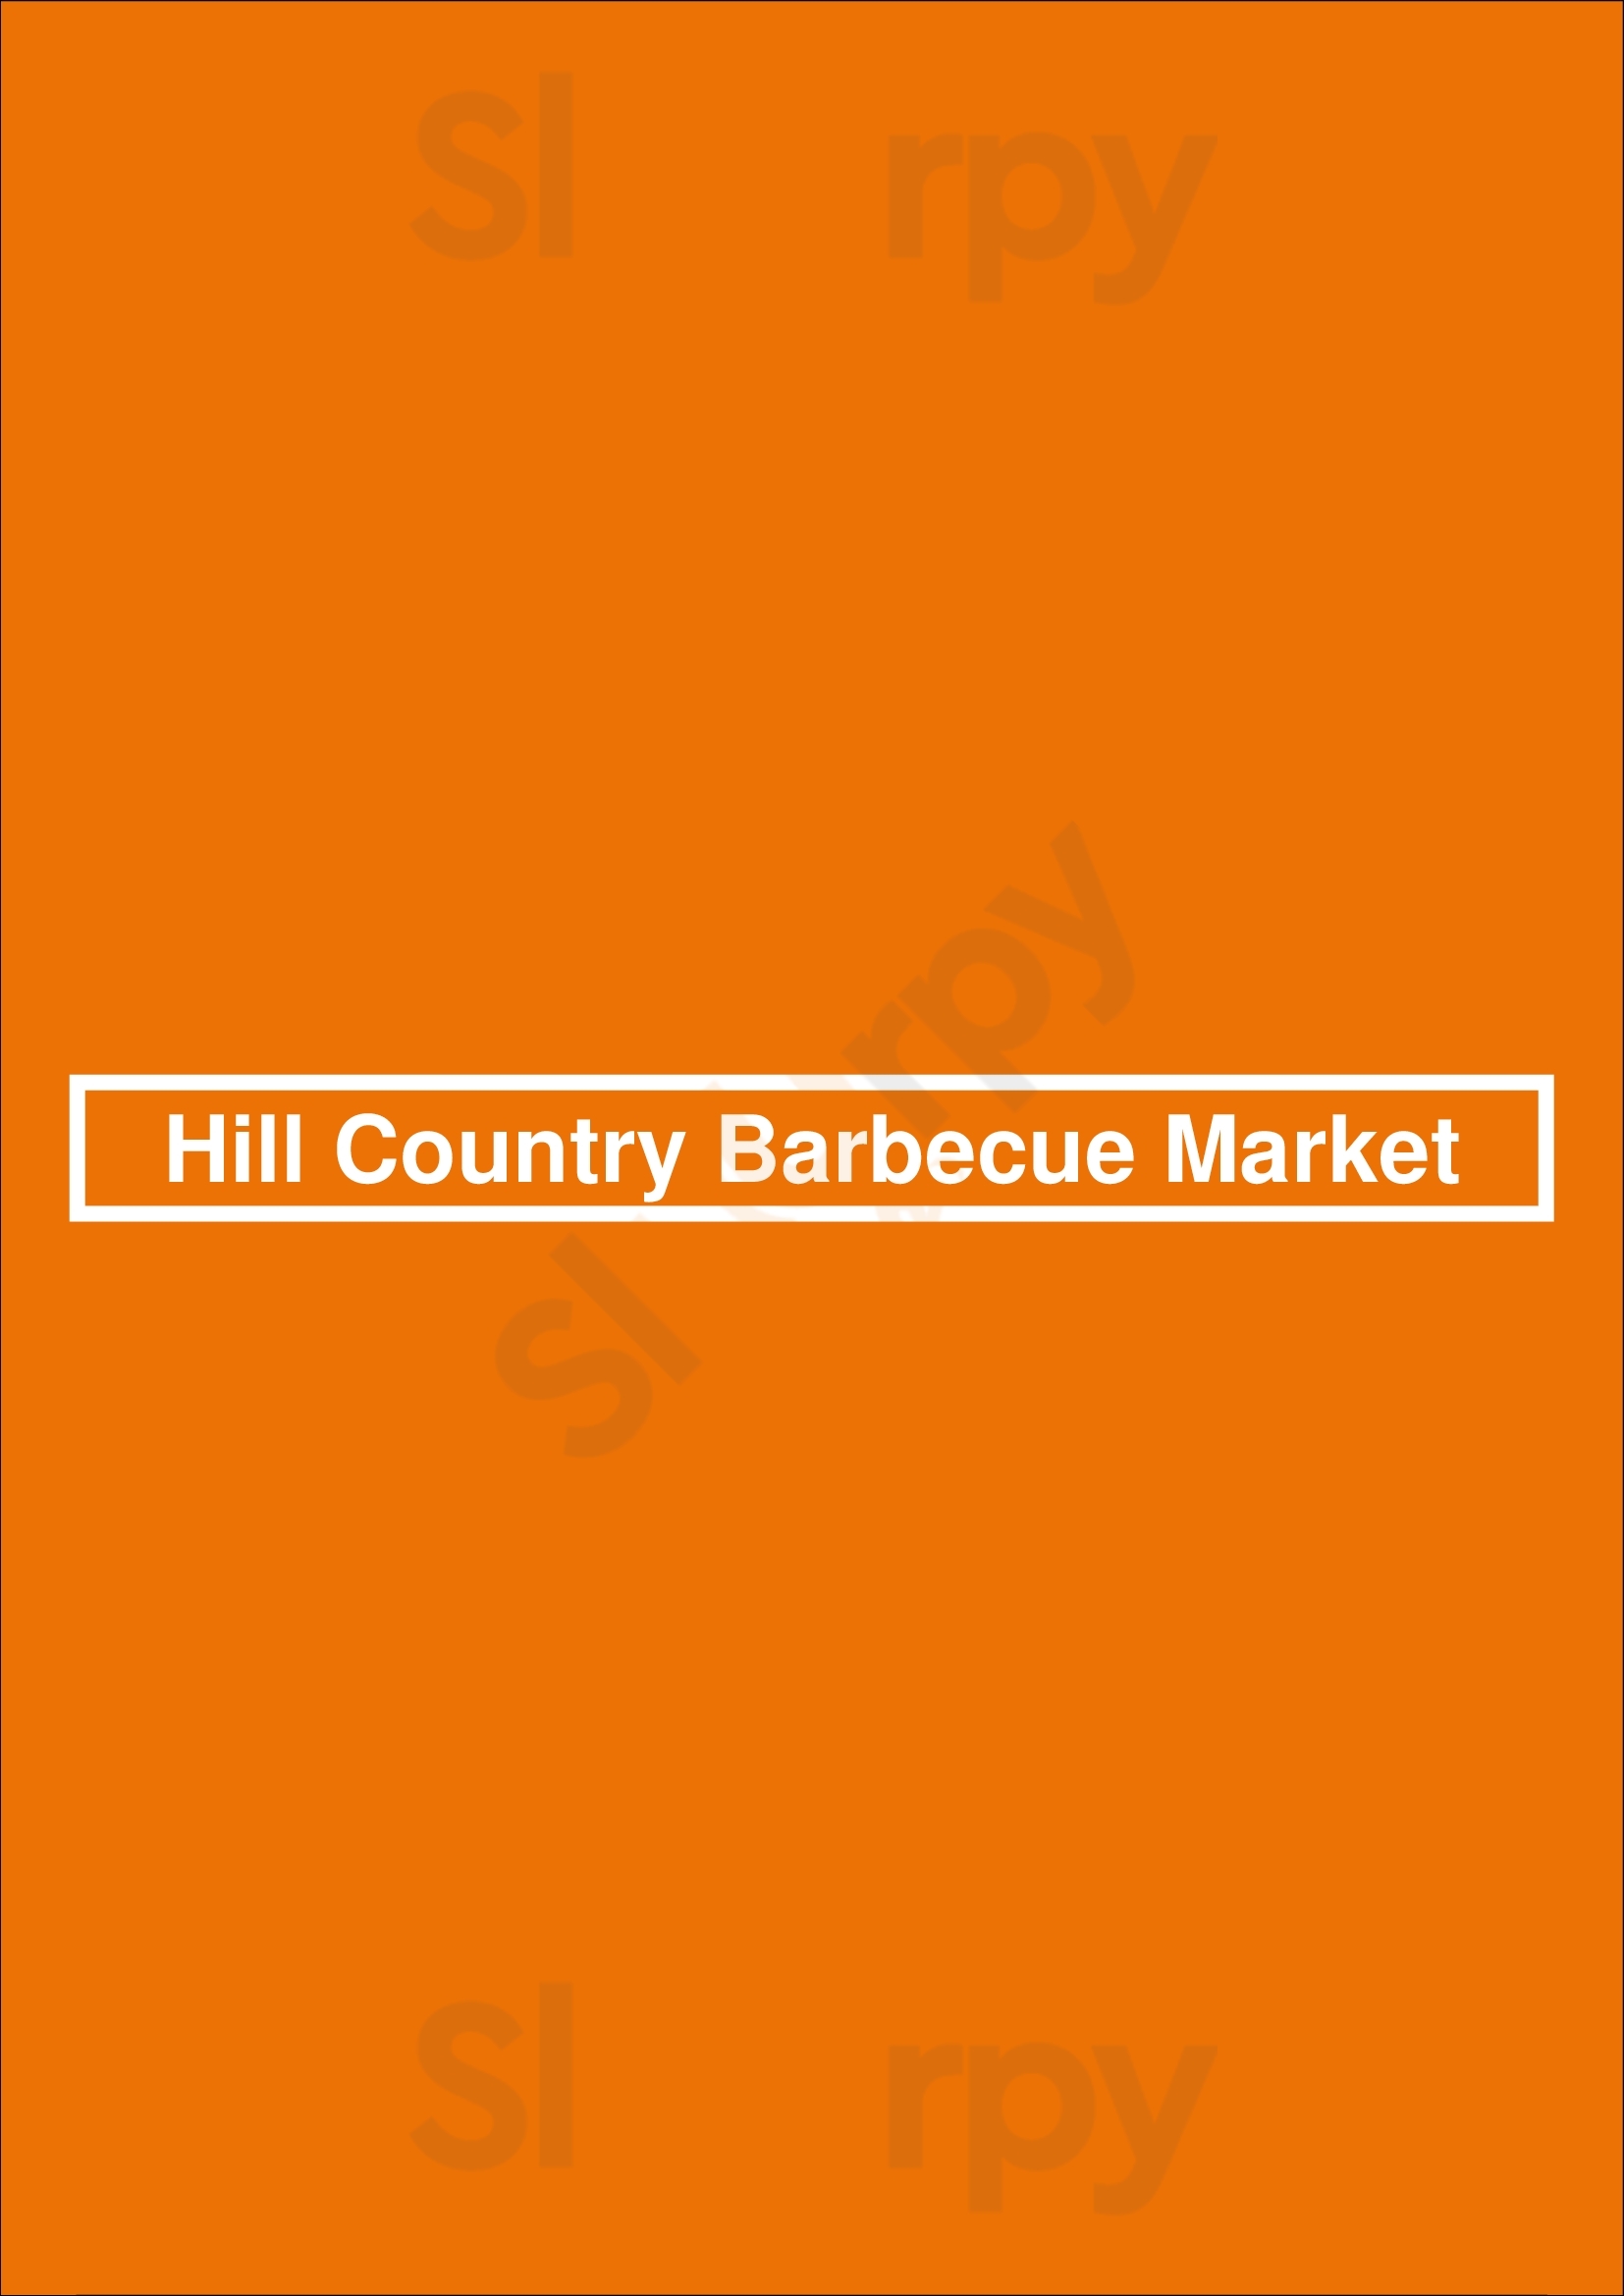 Hill Country Barbecue Market New York City Menu - 1